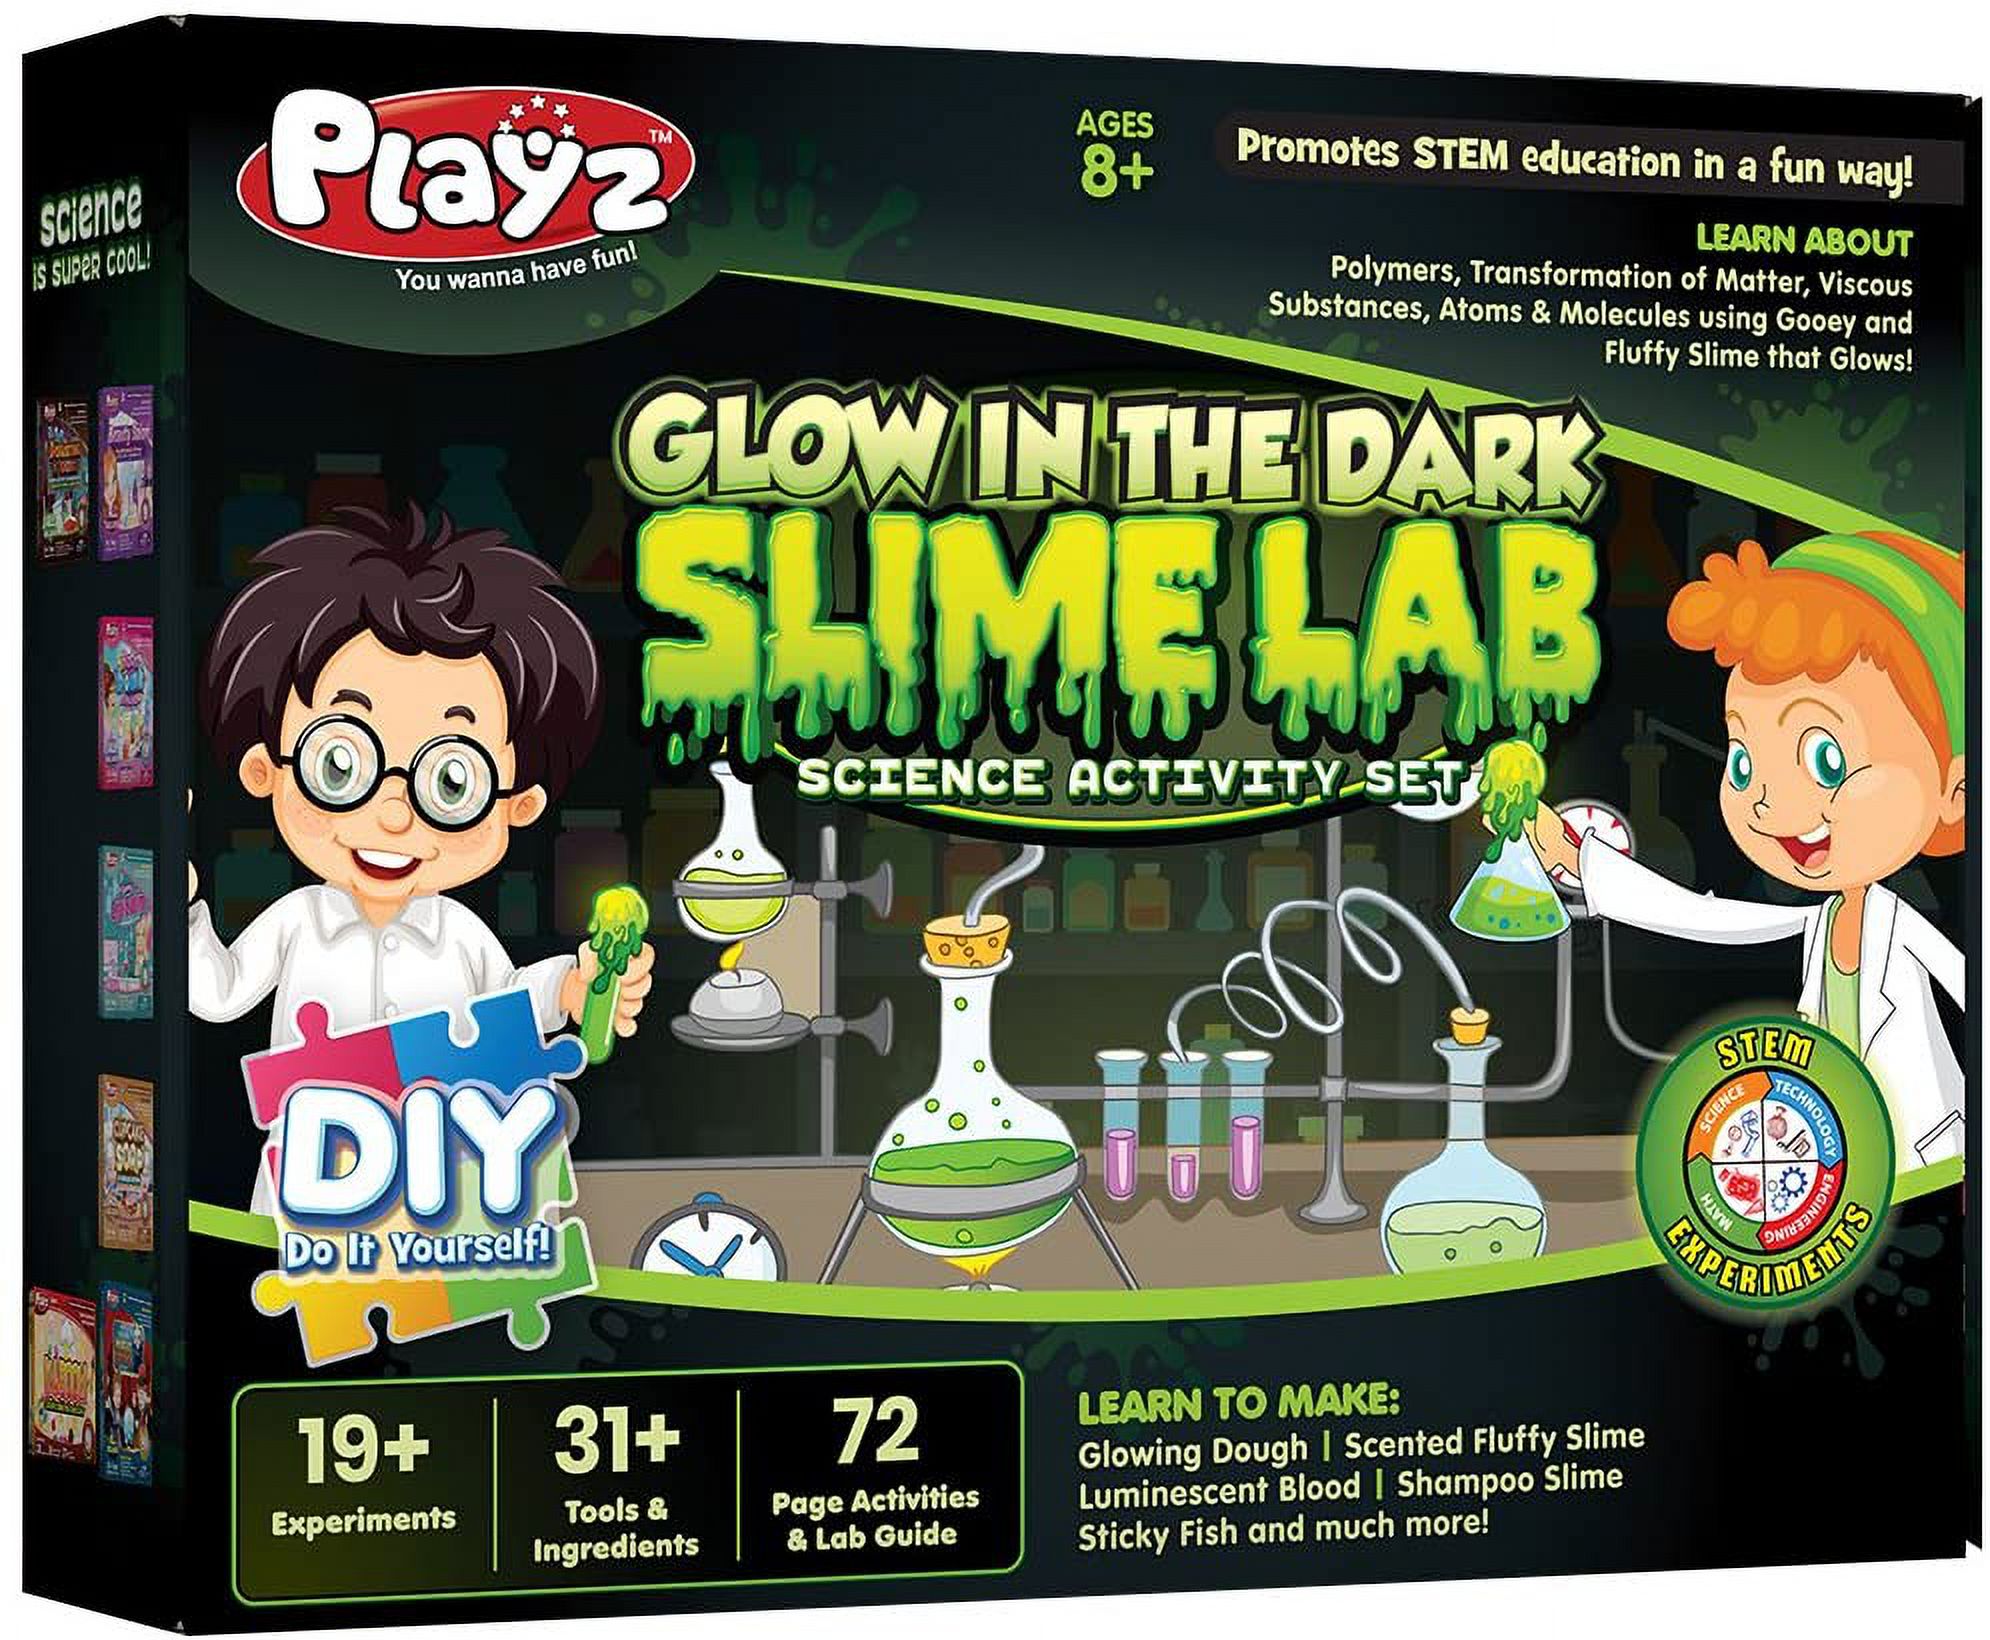 Playz Glow in The Dark Slime Lab Science Kit w/ 19+ Experiments to Make Glowing Dough, Scented Fluffy Slime, Luminescent Blood, Shampoo Slime, &amp; Sticky Fish Through Gooey Science Activ - image 1 of 7